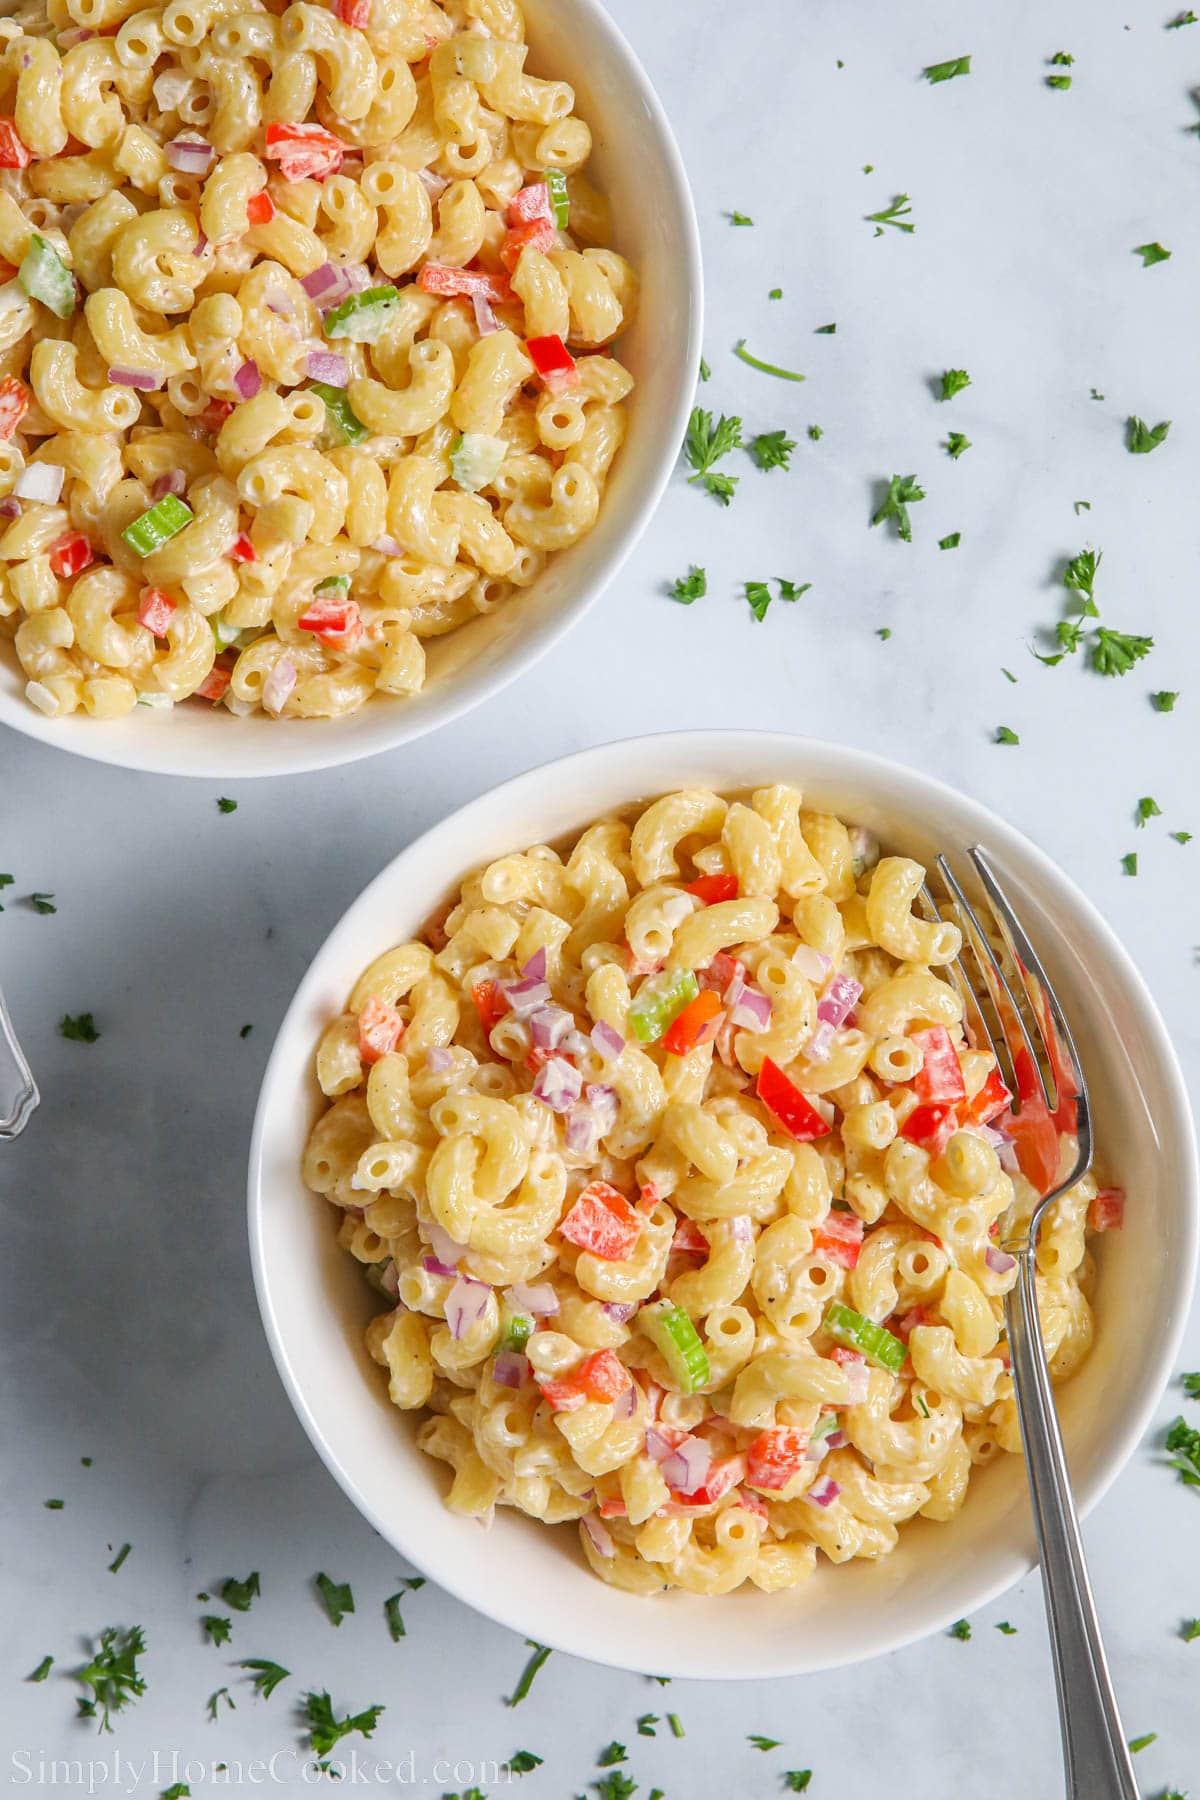 Two bowls of Creamy Pasta Salad with elbow macaroni and diced vegetables with forks and chopped parsley sprinkled nearby.